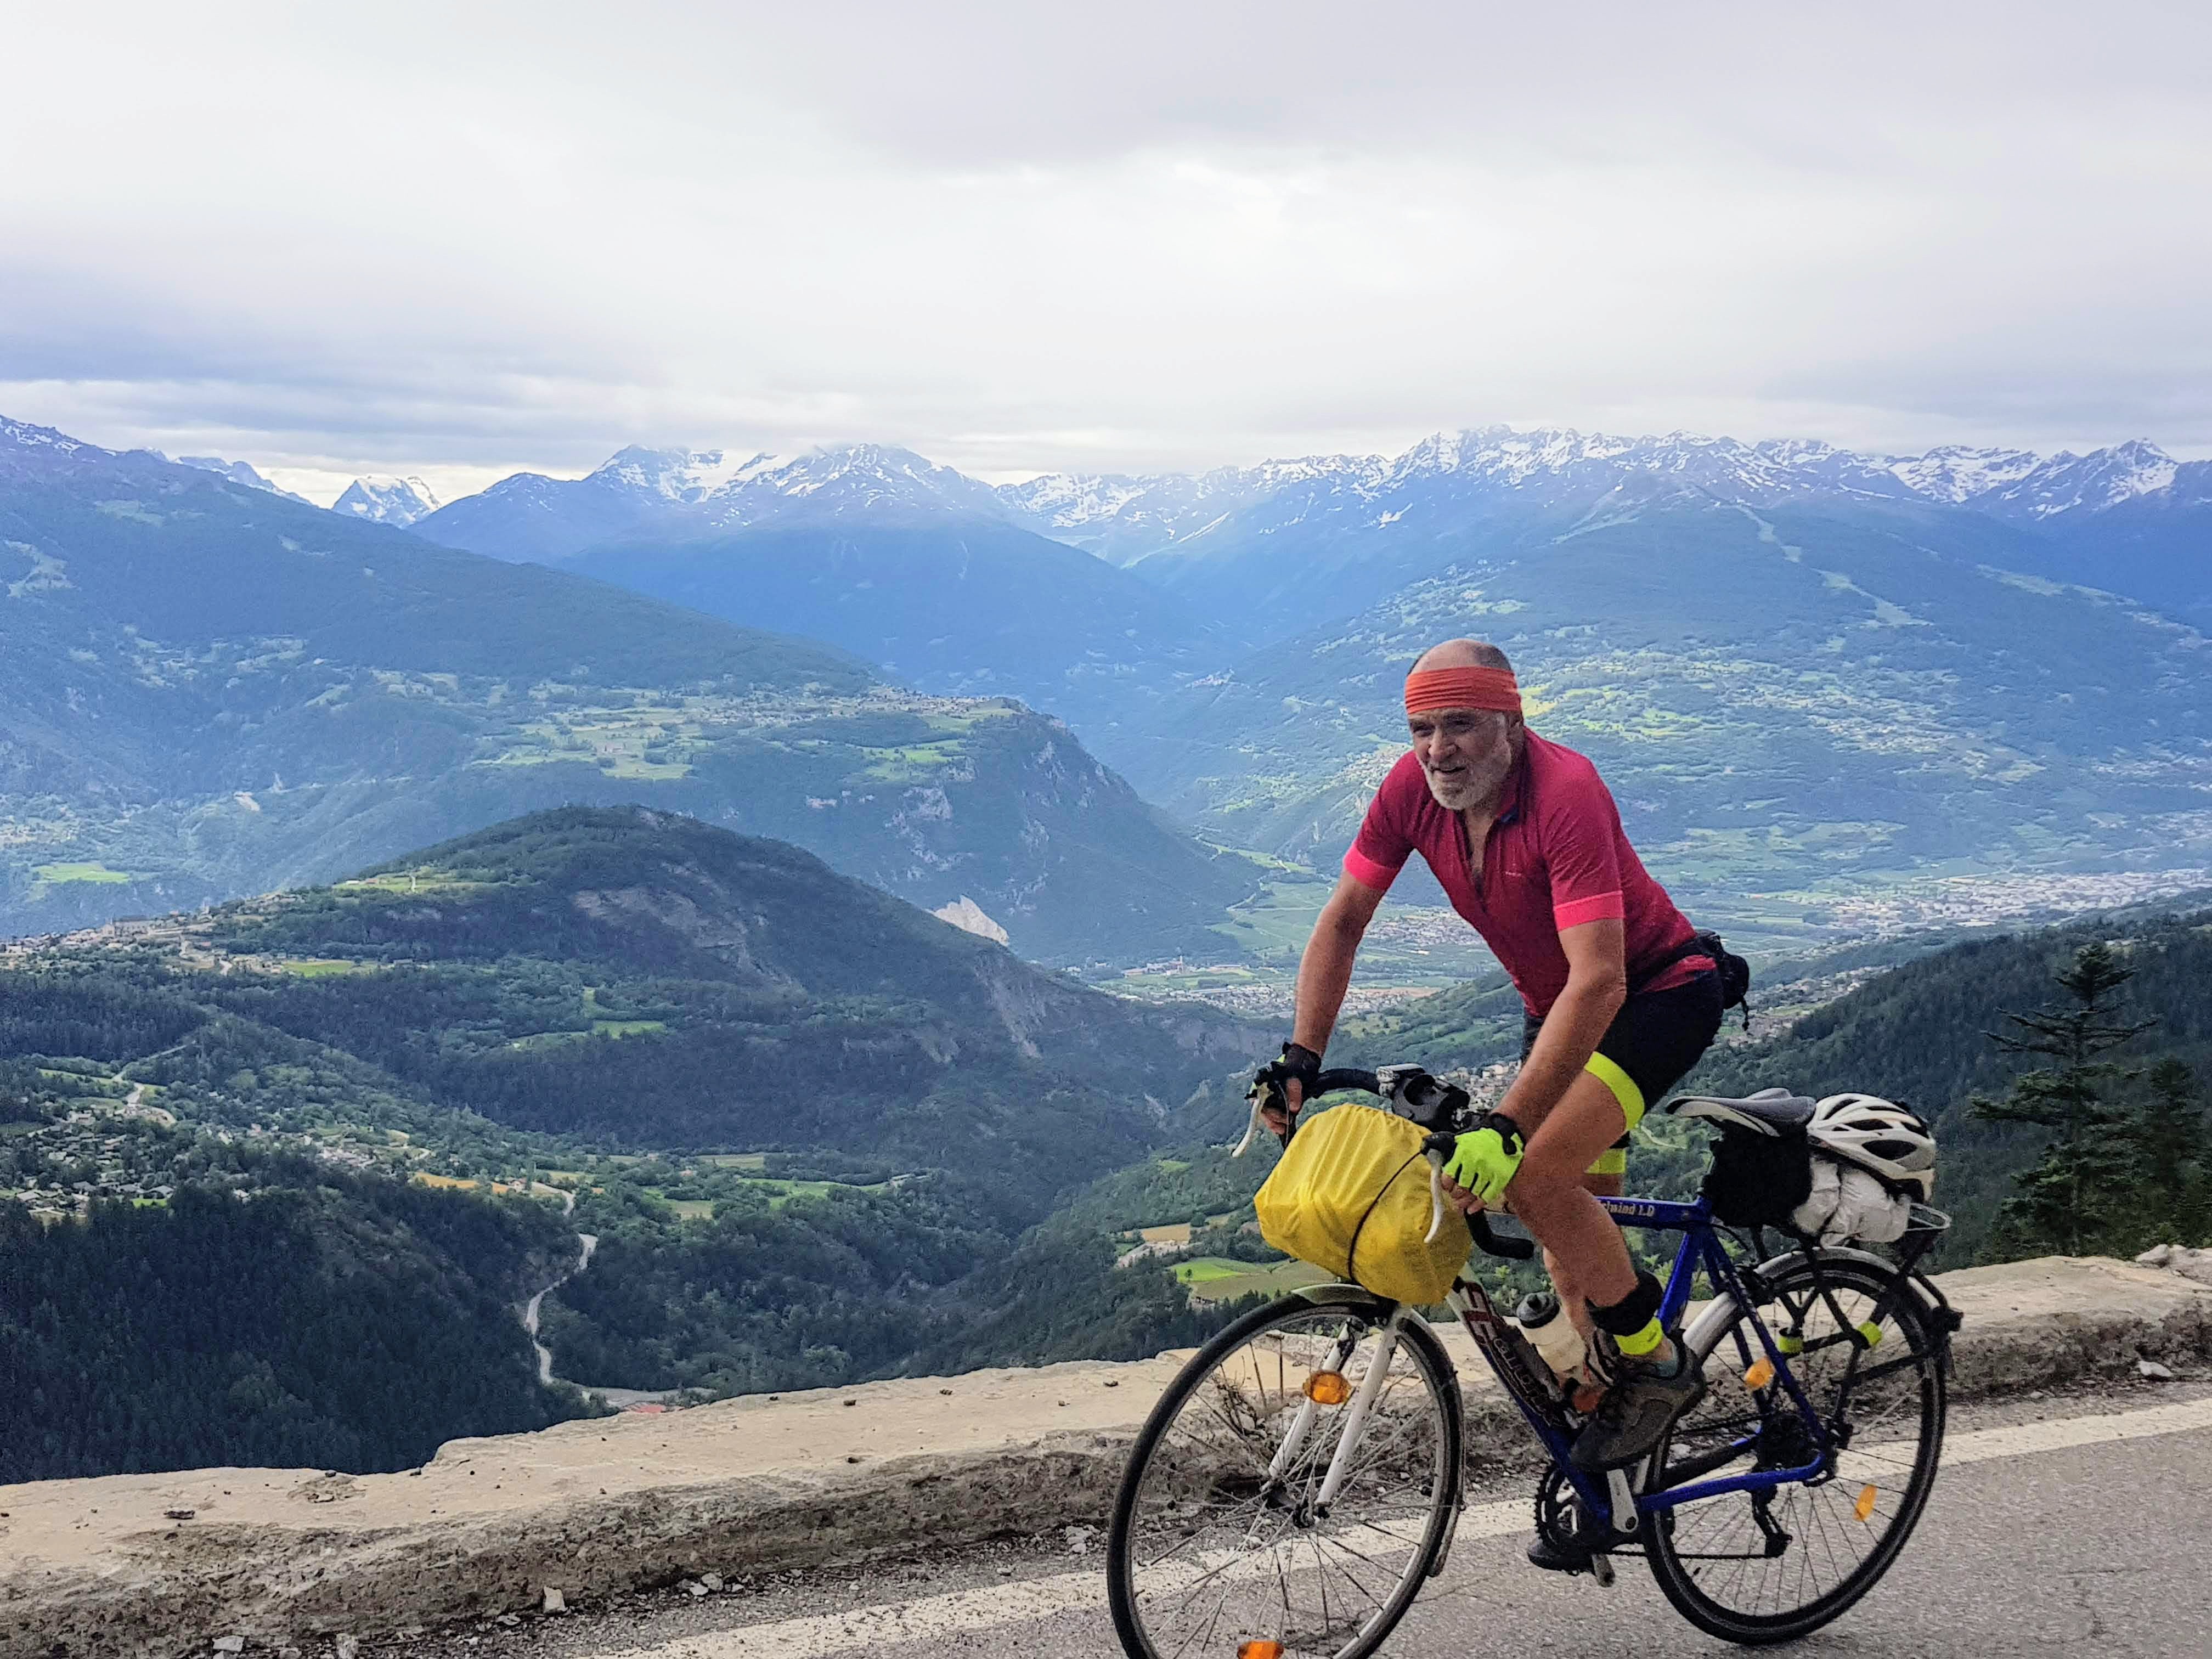 cycling companion wanted for climbing mountain passes in Portugal